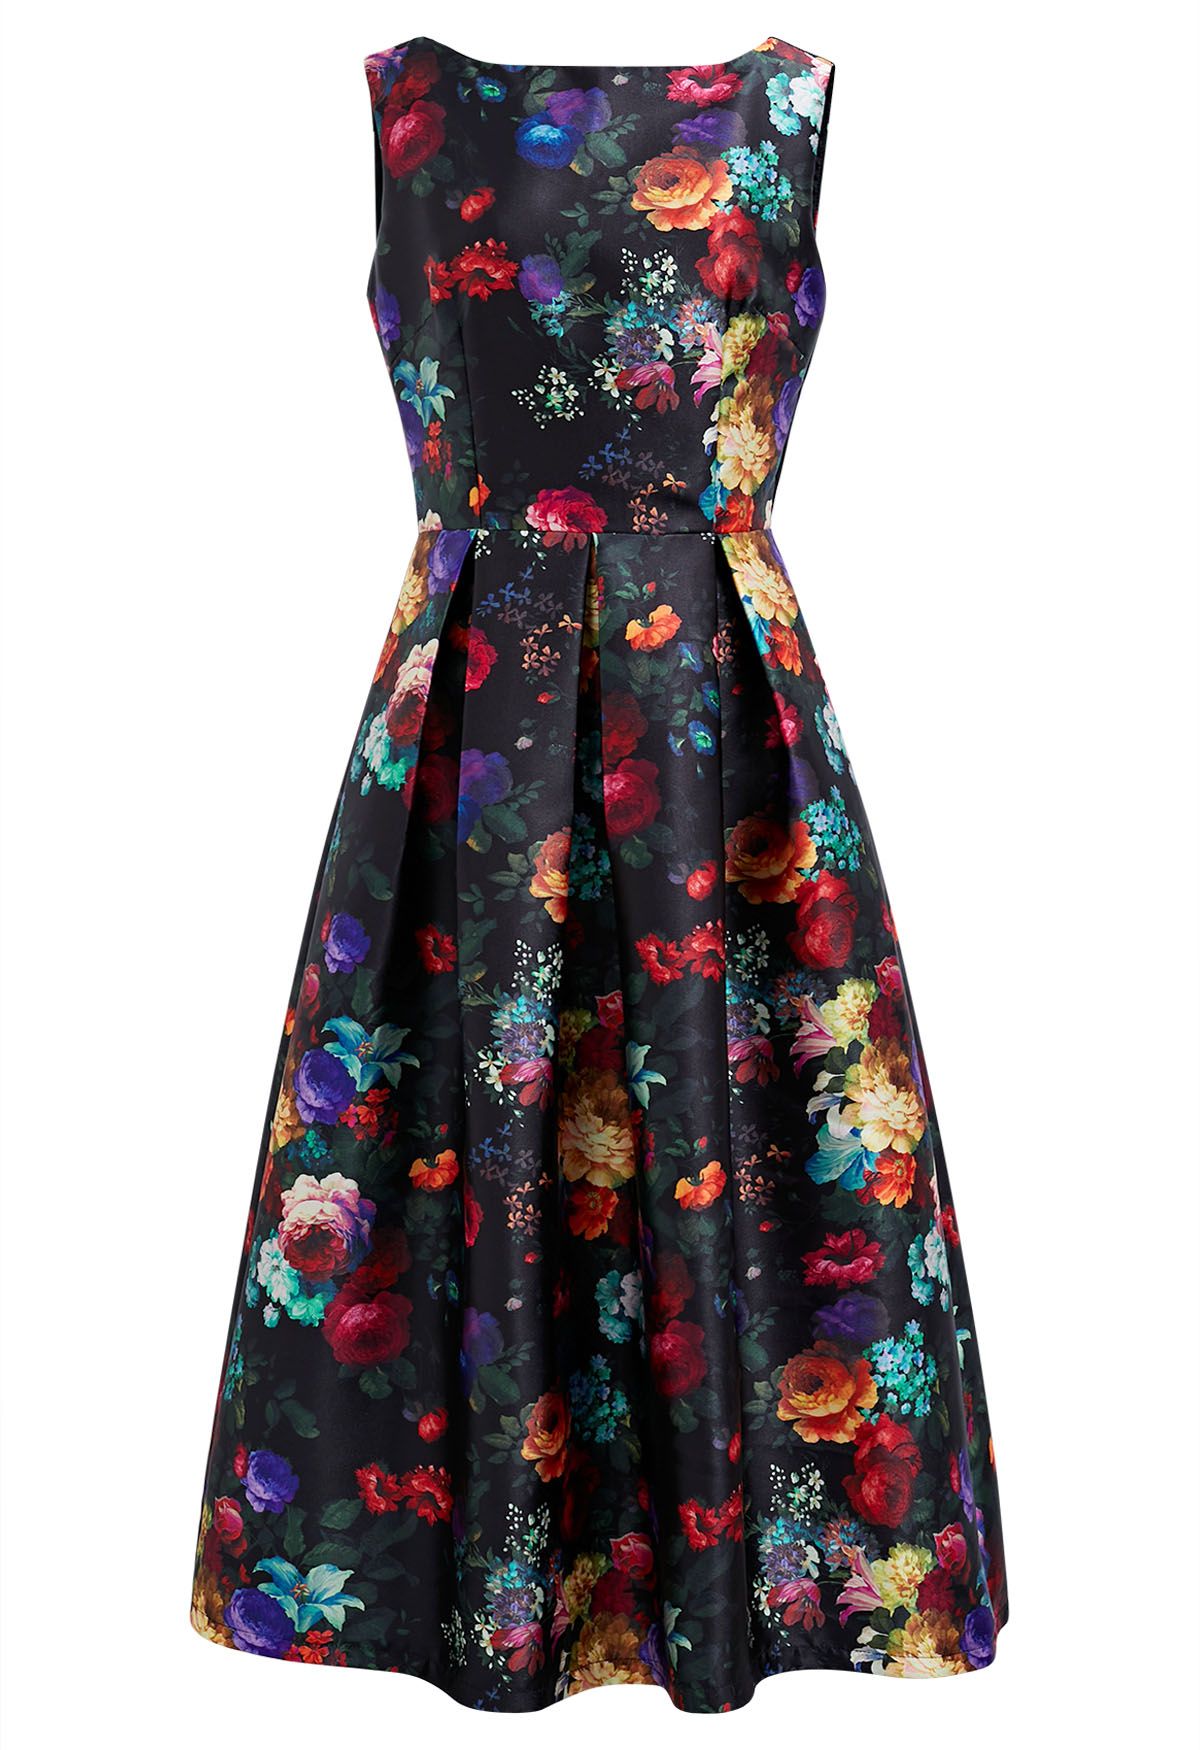 Blossom Palette Sleeveless Pleated Dress - Retro, Indie and Unique Fashion